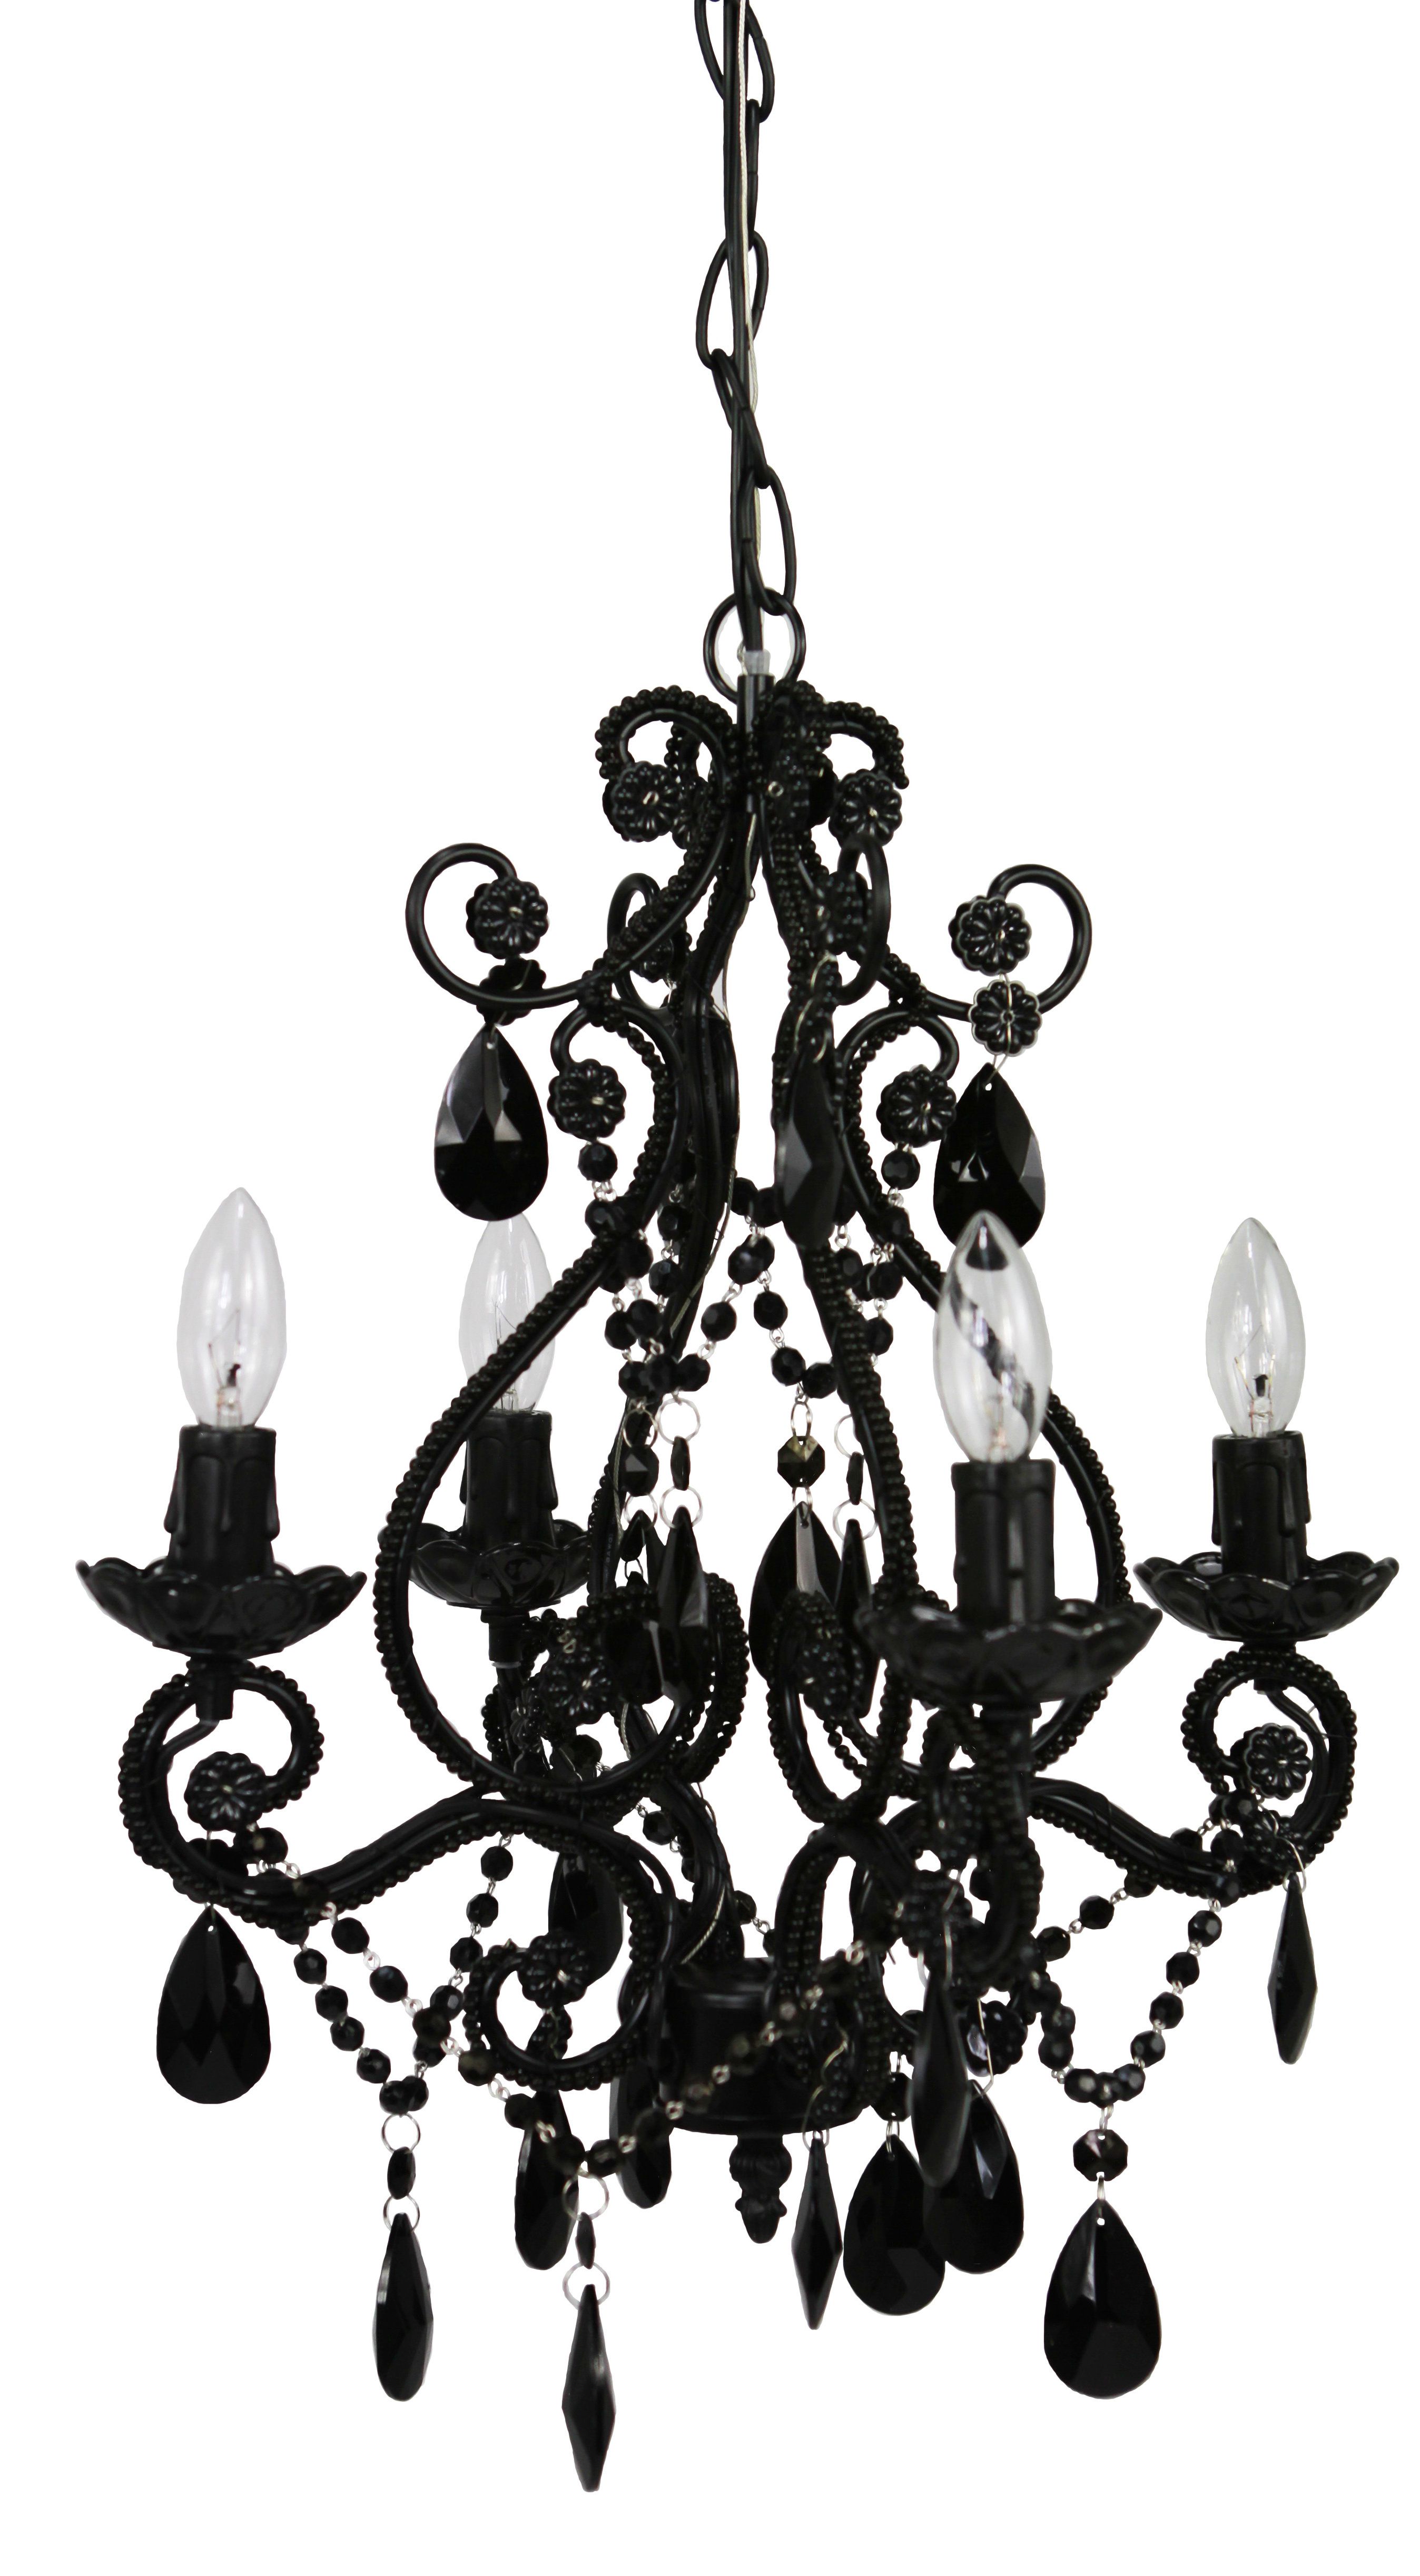 Aldora 4 Light Candle Style Chandelier Throughout Aldora 4 Light Candle Style Chandeliers (View 2 of 30)